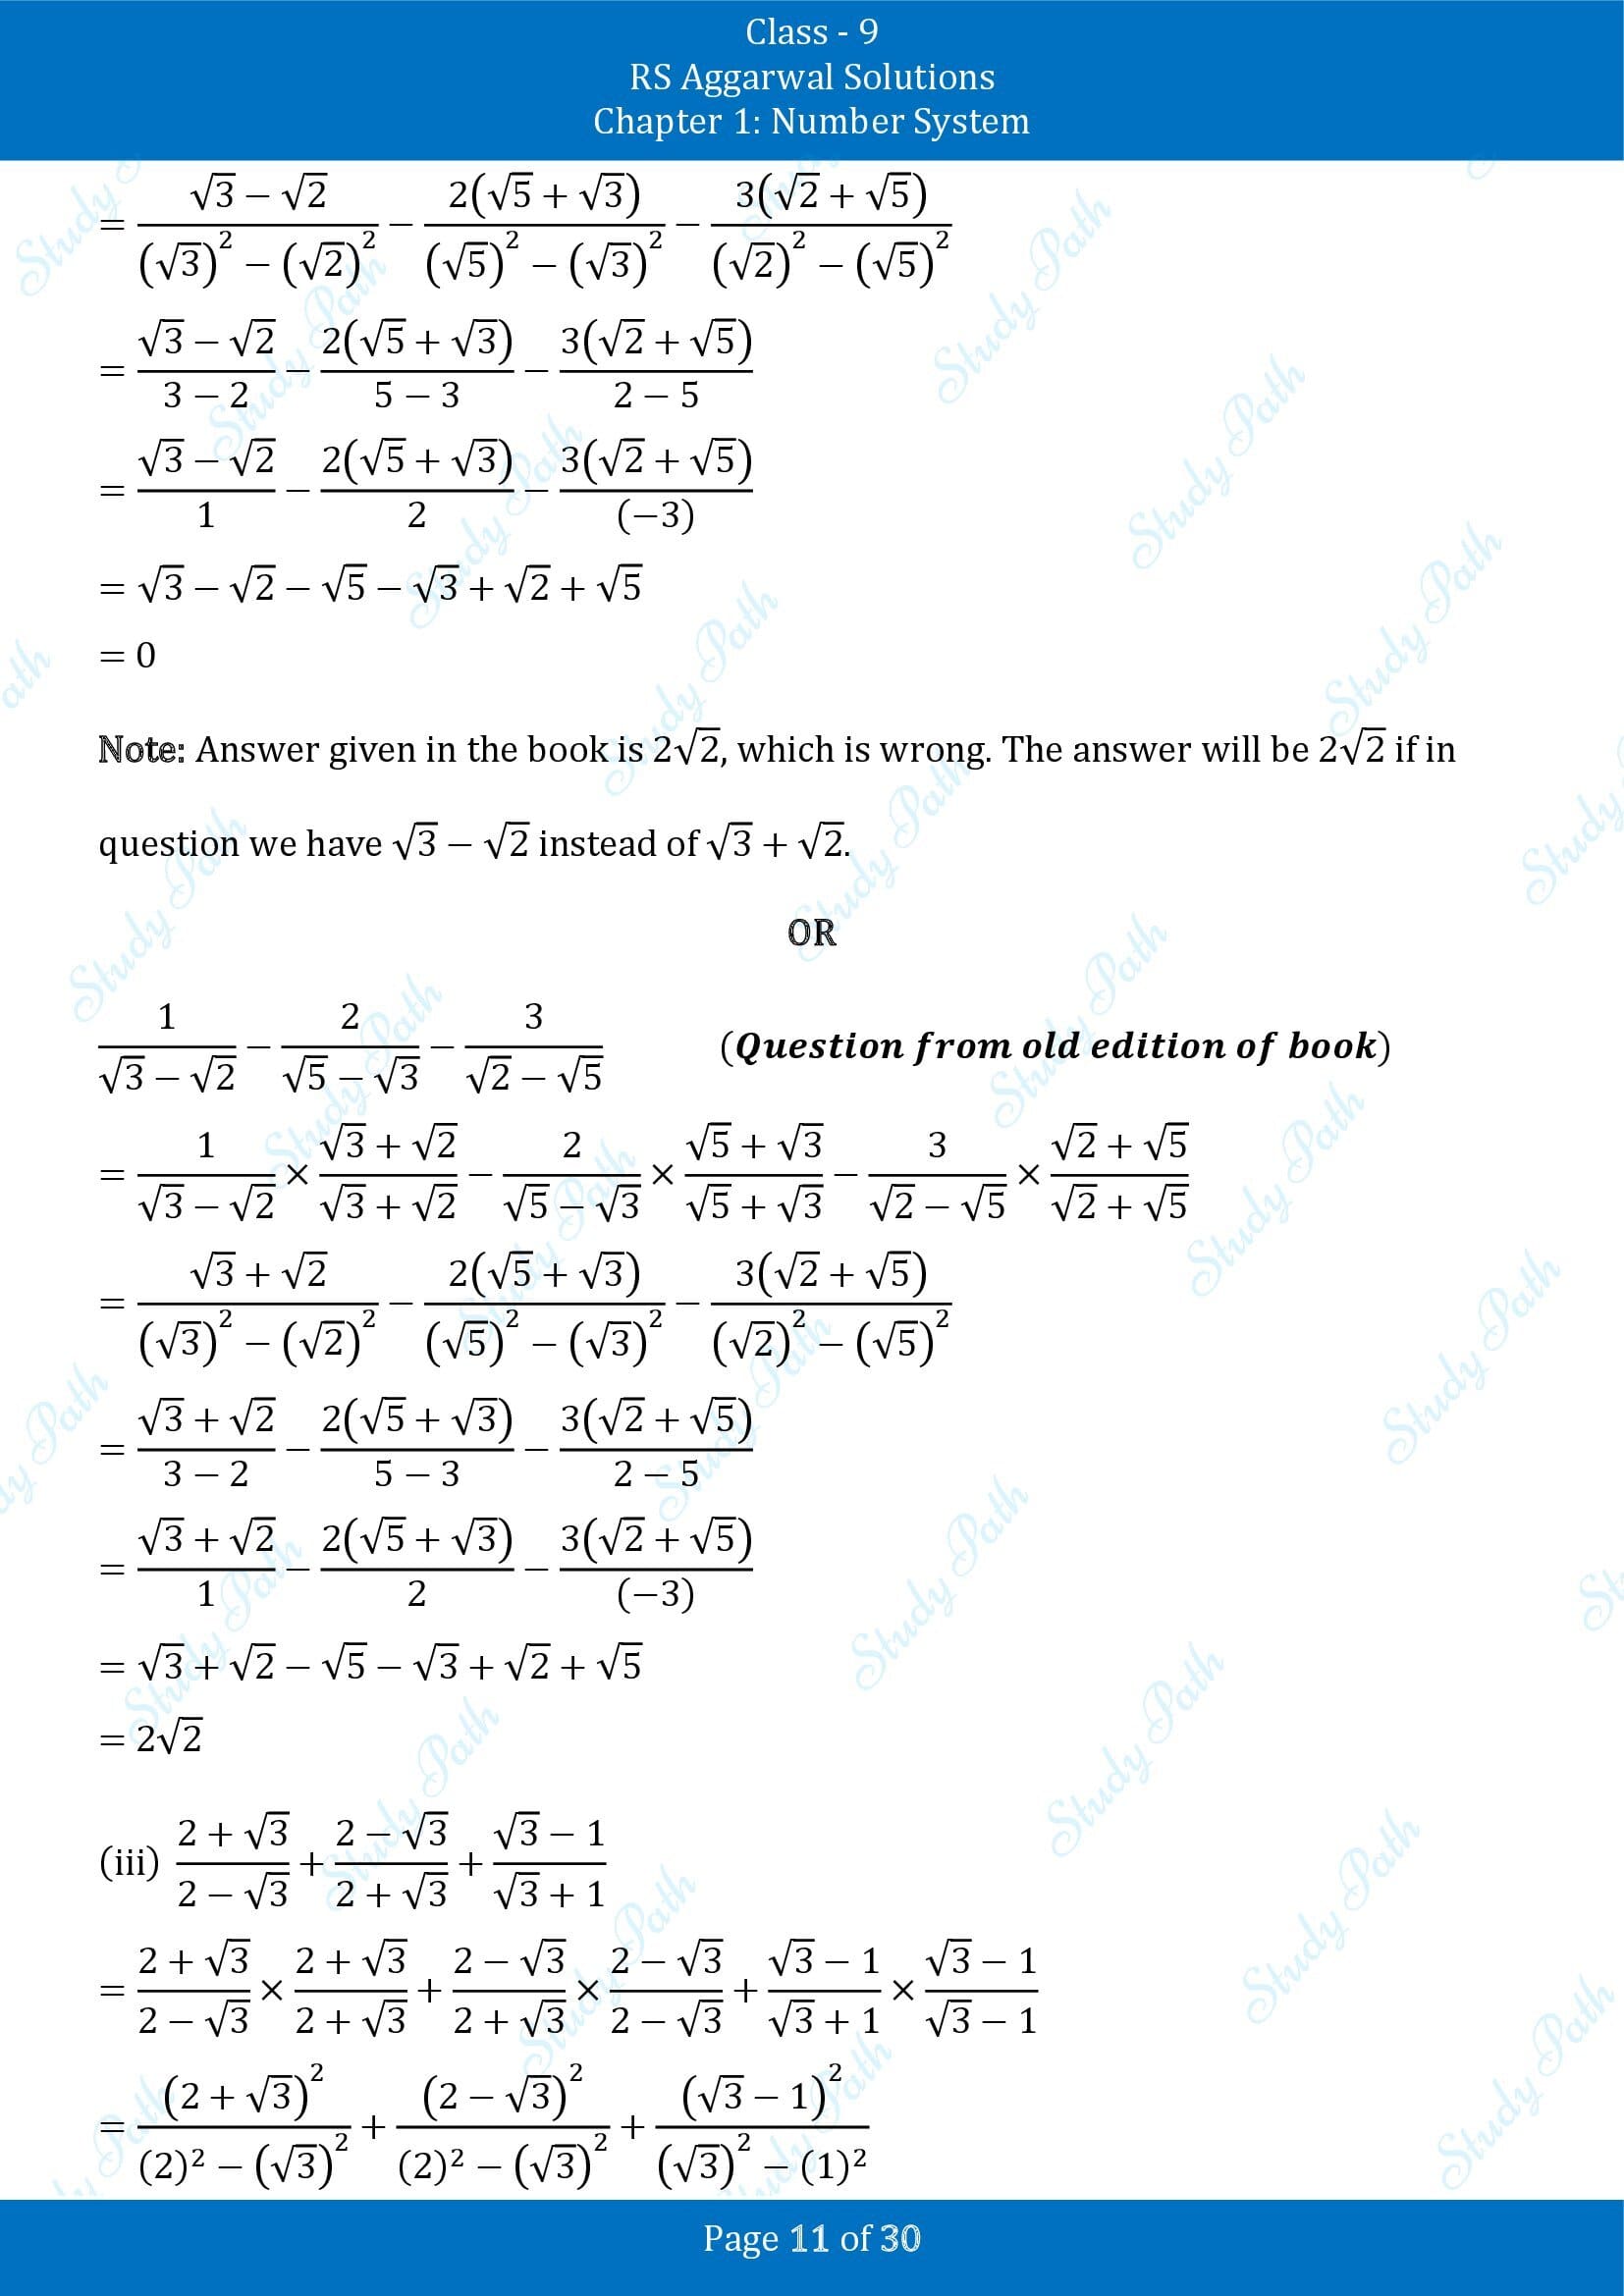 RS Aggarwal Solutions Class 9 Chapter 1 Number System Exercise 1F 00011